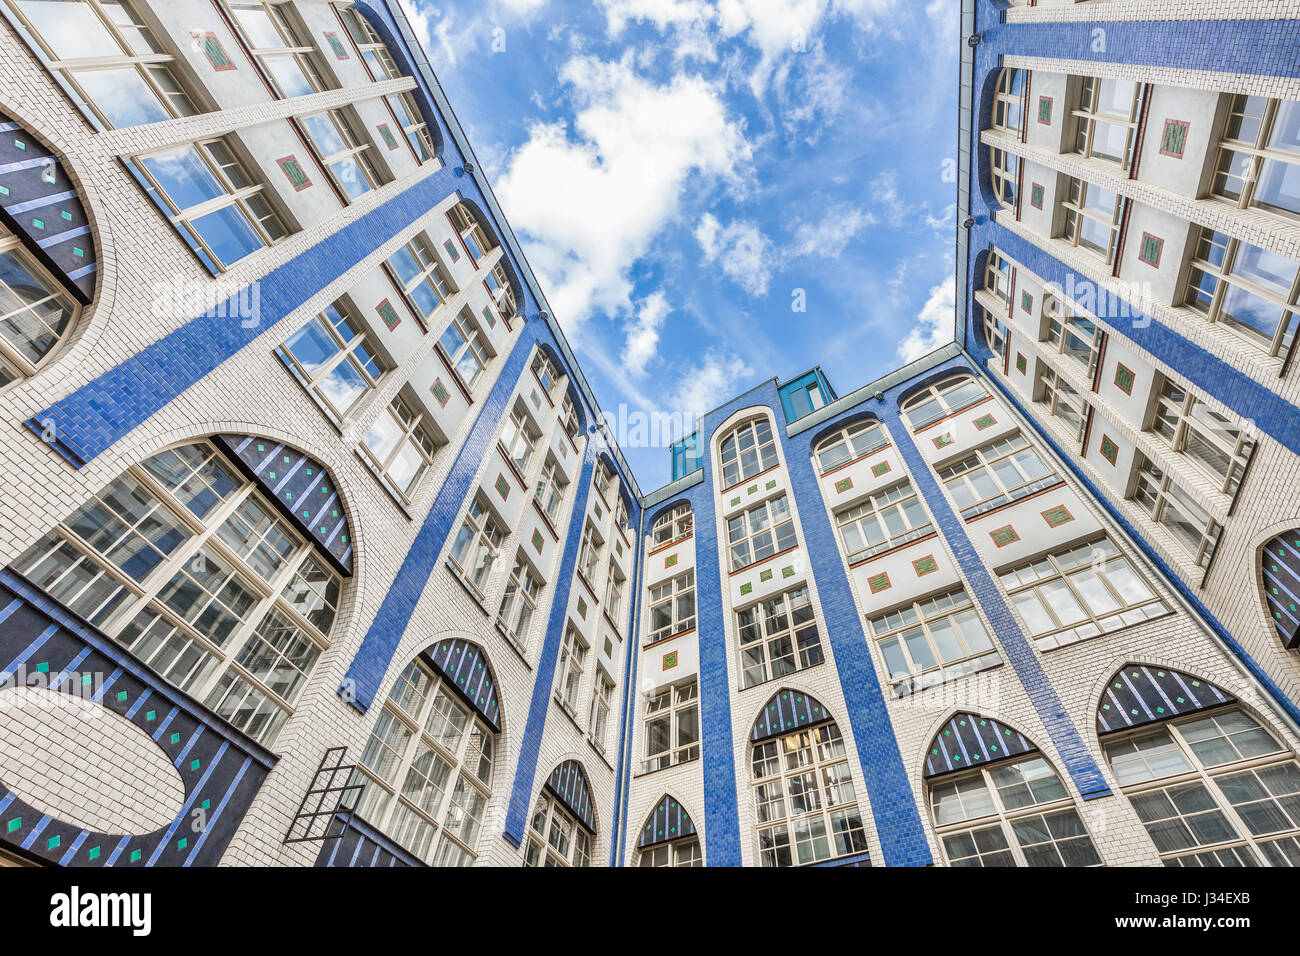 Bottom wide angle view of inner courtyard with beautiful facade at famous Hackesche Hofe building complex, district of Spandauer Vorstadt, Berlin Stock Photo